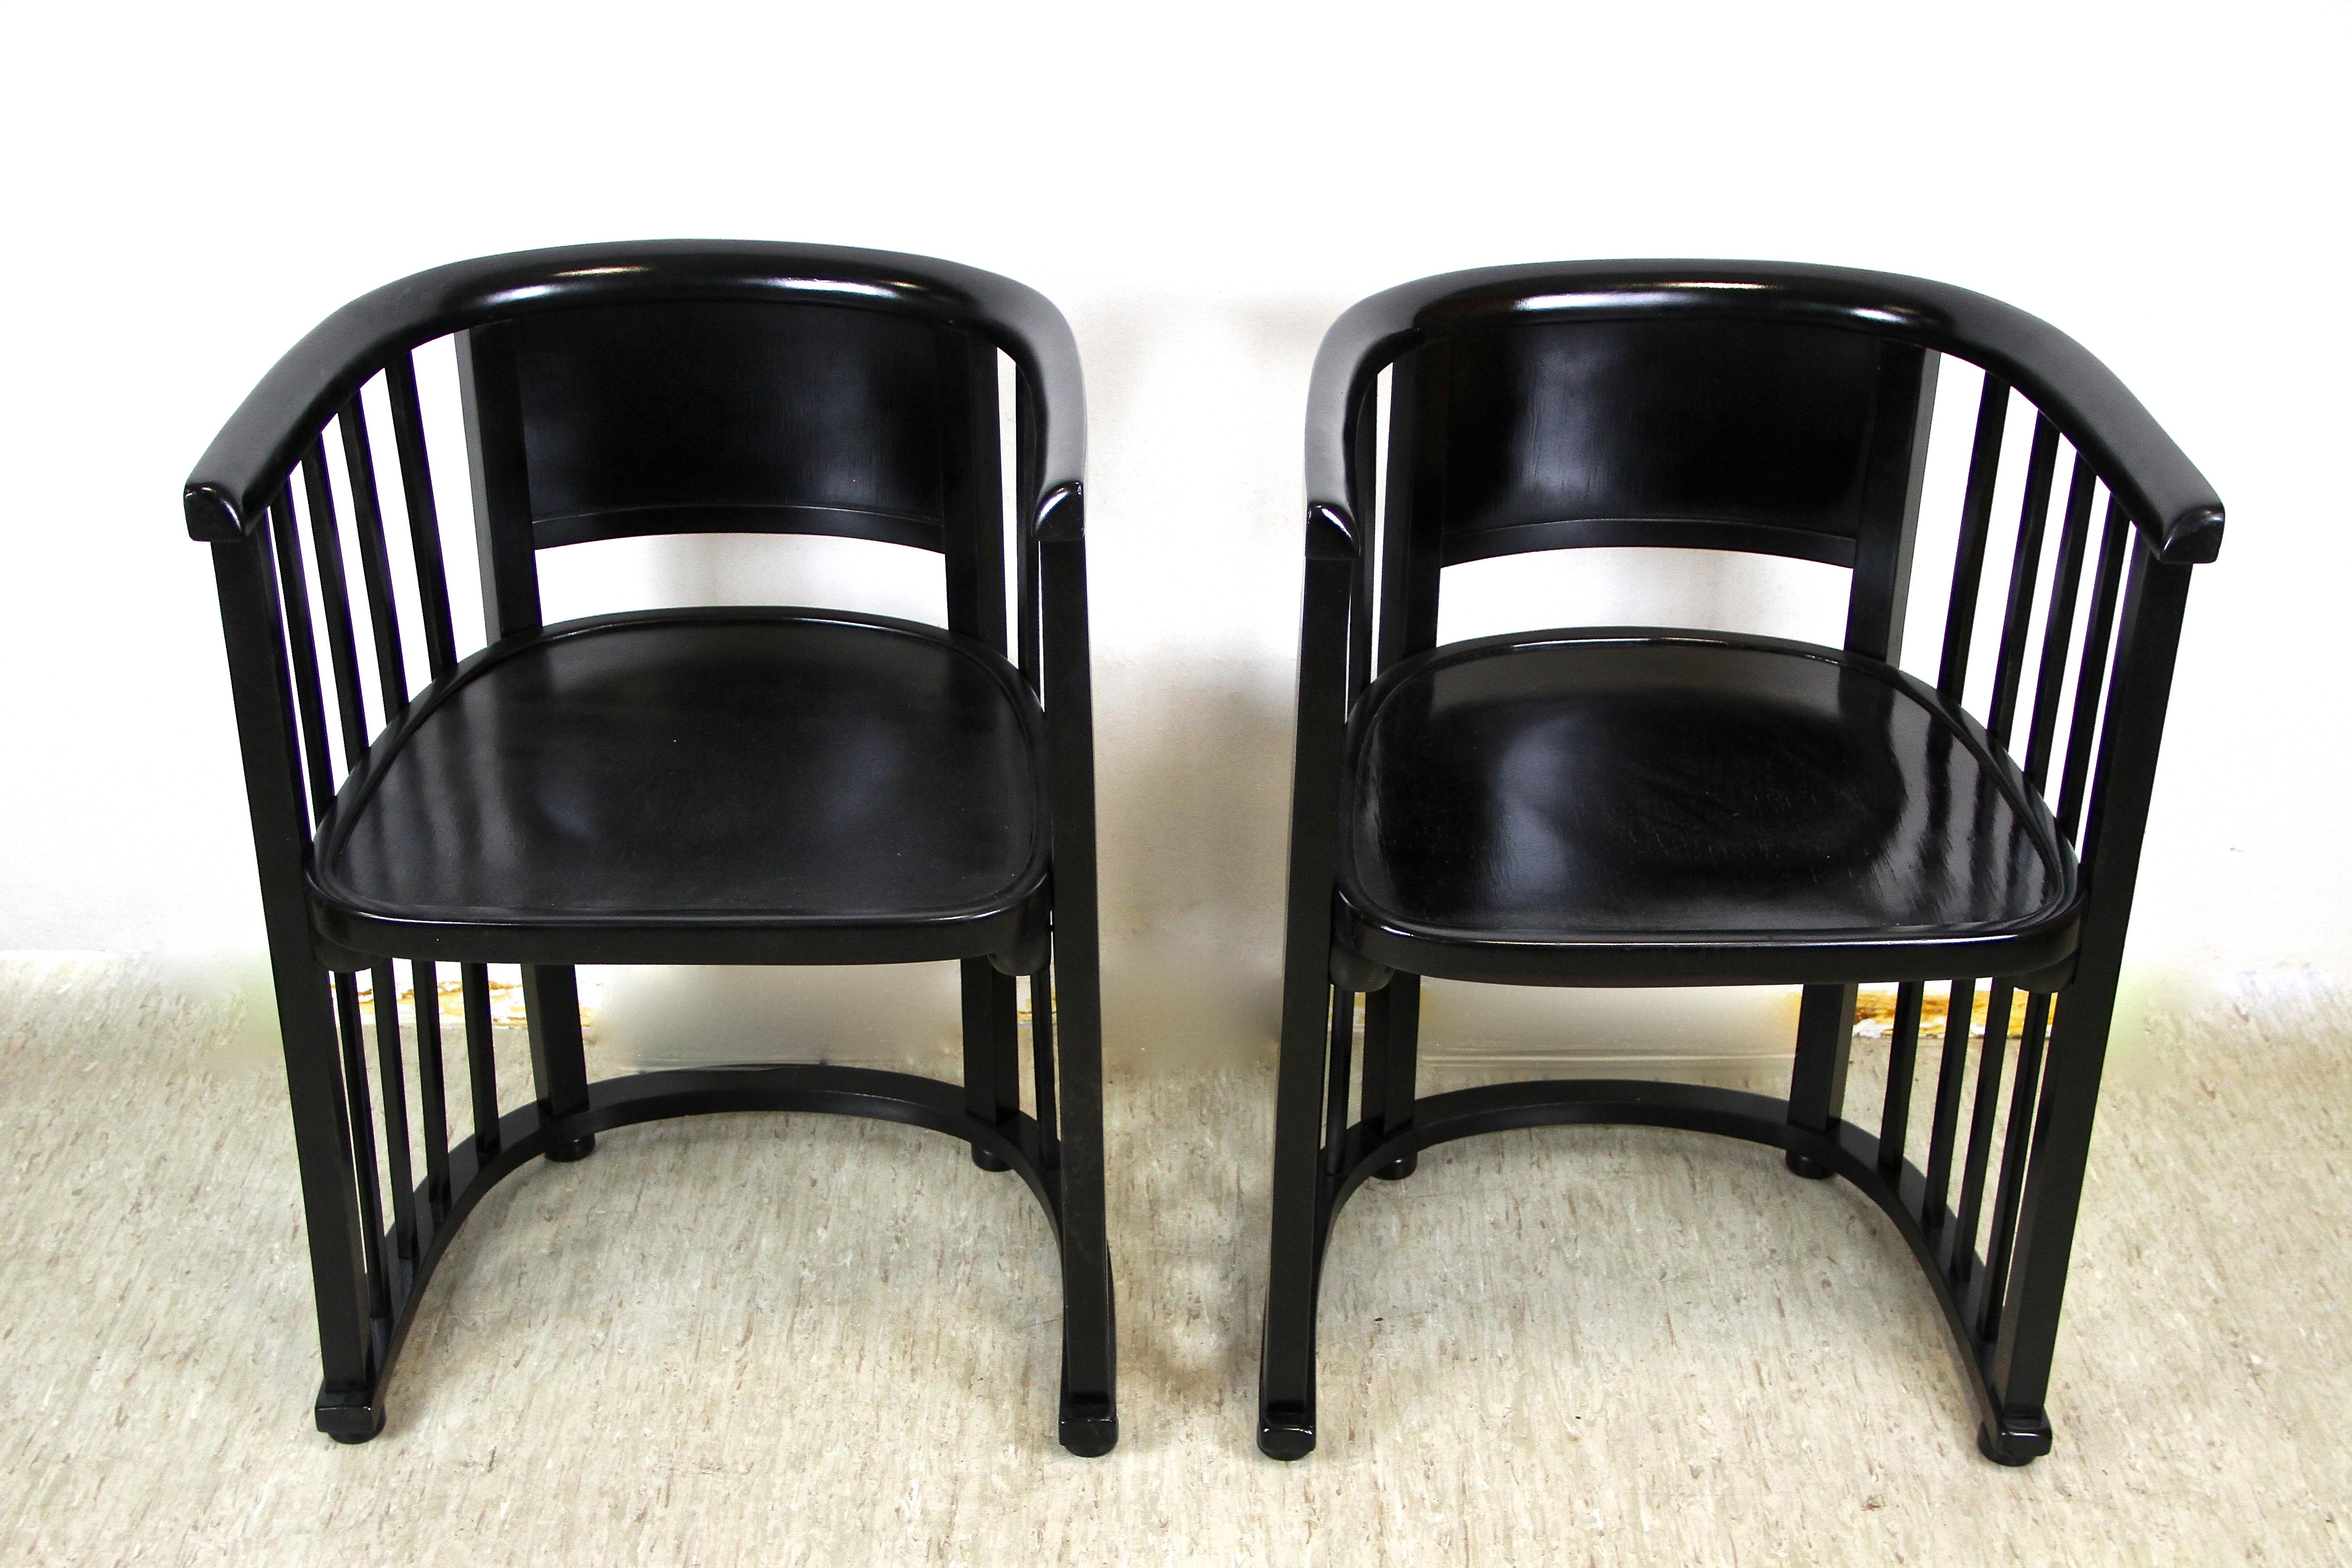 Lacquered Bentwood Chairs Design Josef Hoffmann Attributed to J&J Kohn, Austria, ca. 1910 For Sale